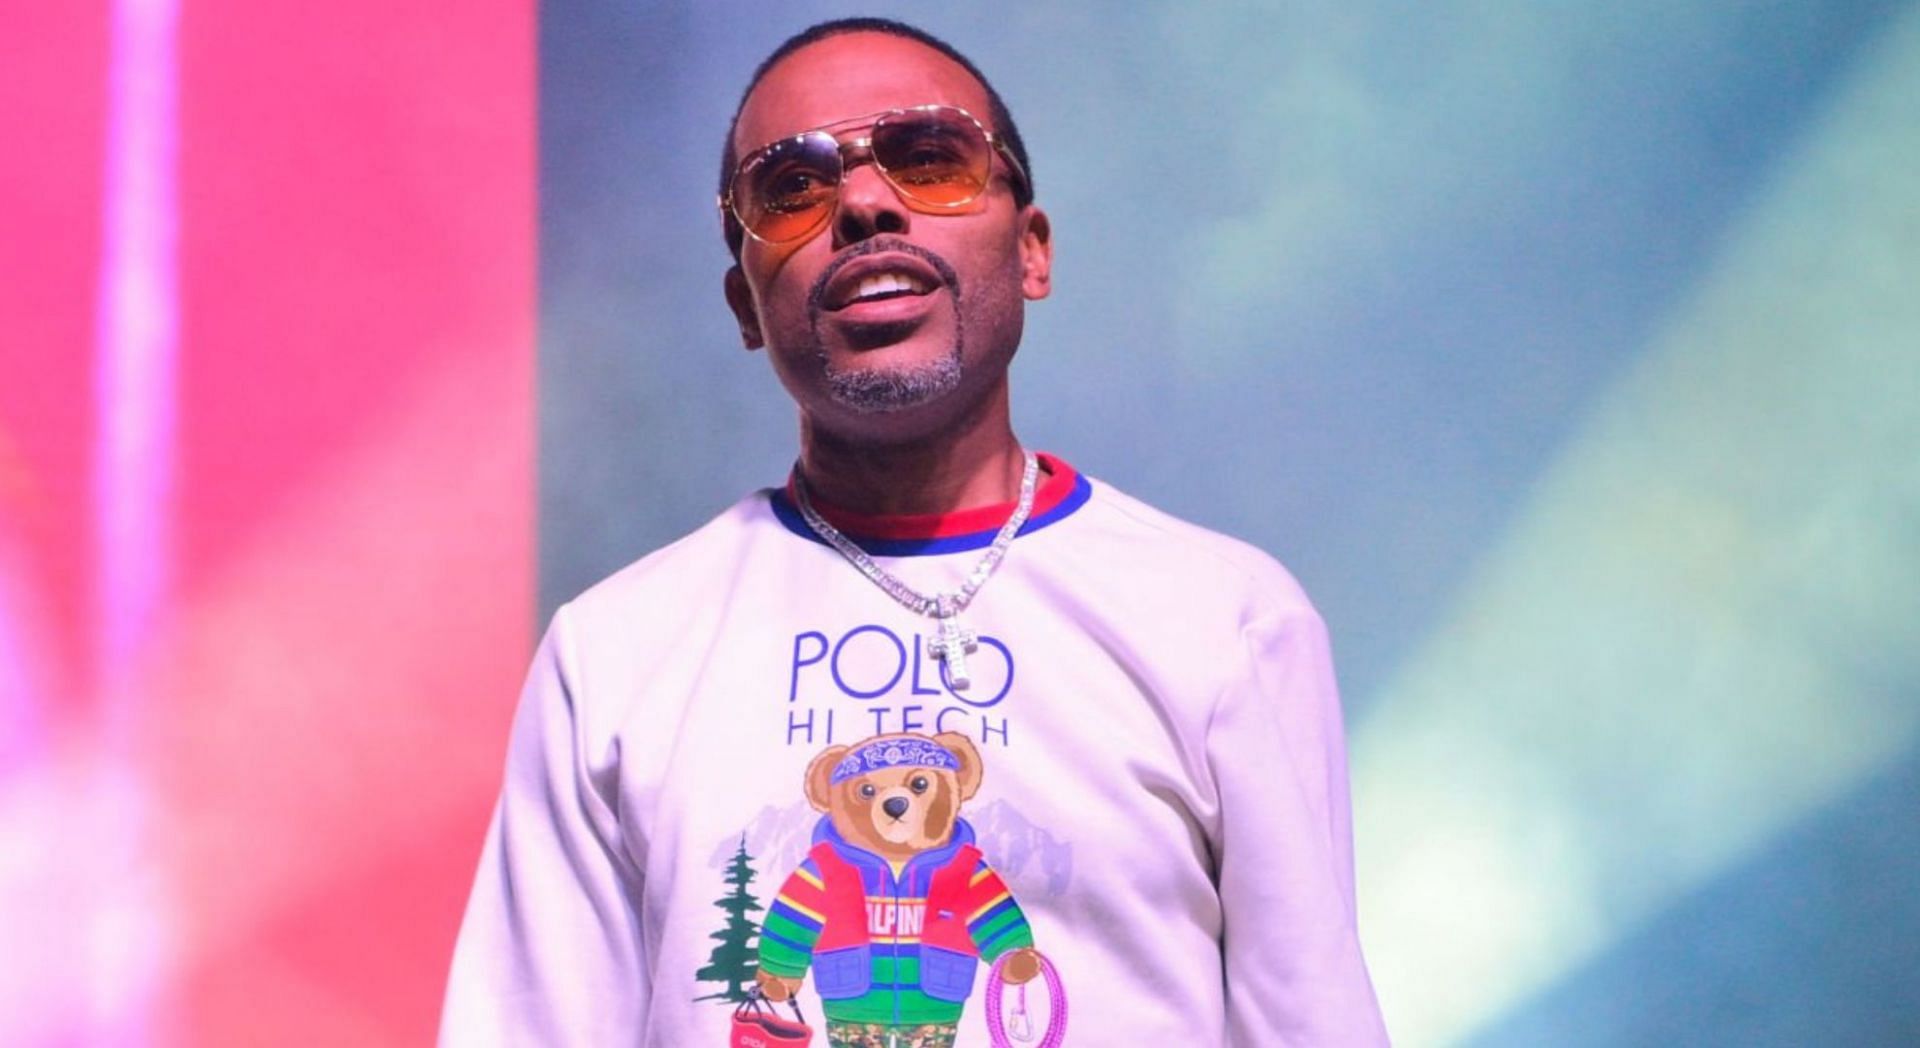 Lil Duval disturbing past tweets about his daughter resurfaced online and left netizens enraged (Image via Getty Images)